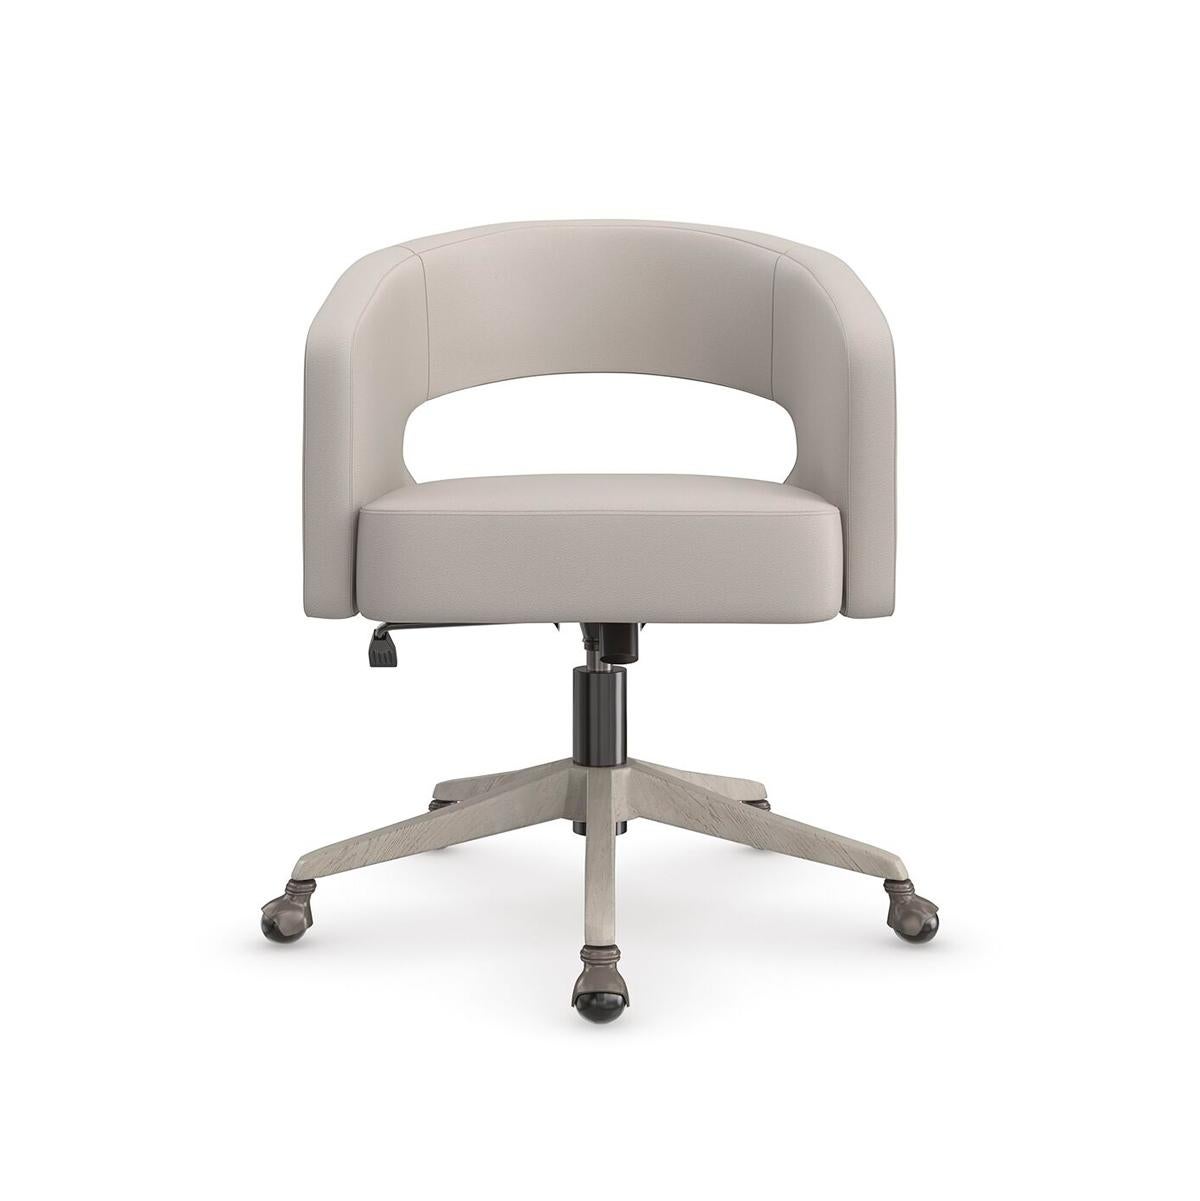 A sophisticated take on the traditional desk chair, with a curved, open back and softly upholstered seat in a supple taupe leather. An exposed ash wood detail on its swivel base adds warmth and a harmonious element. Casters make it easy to move and